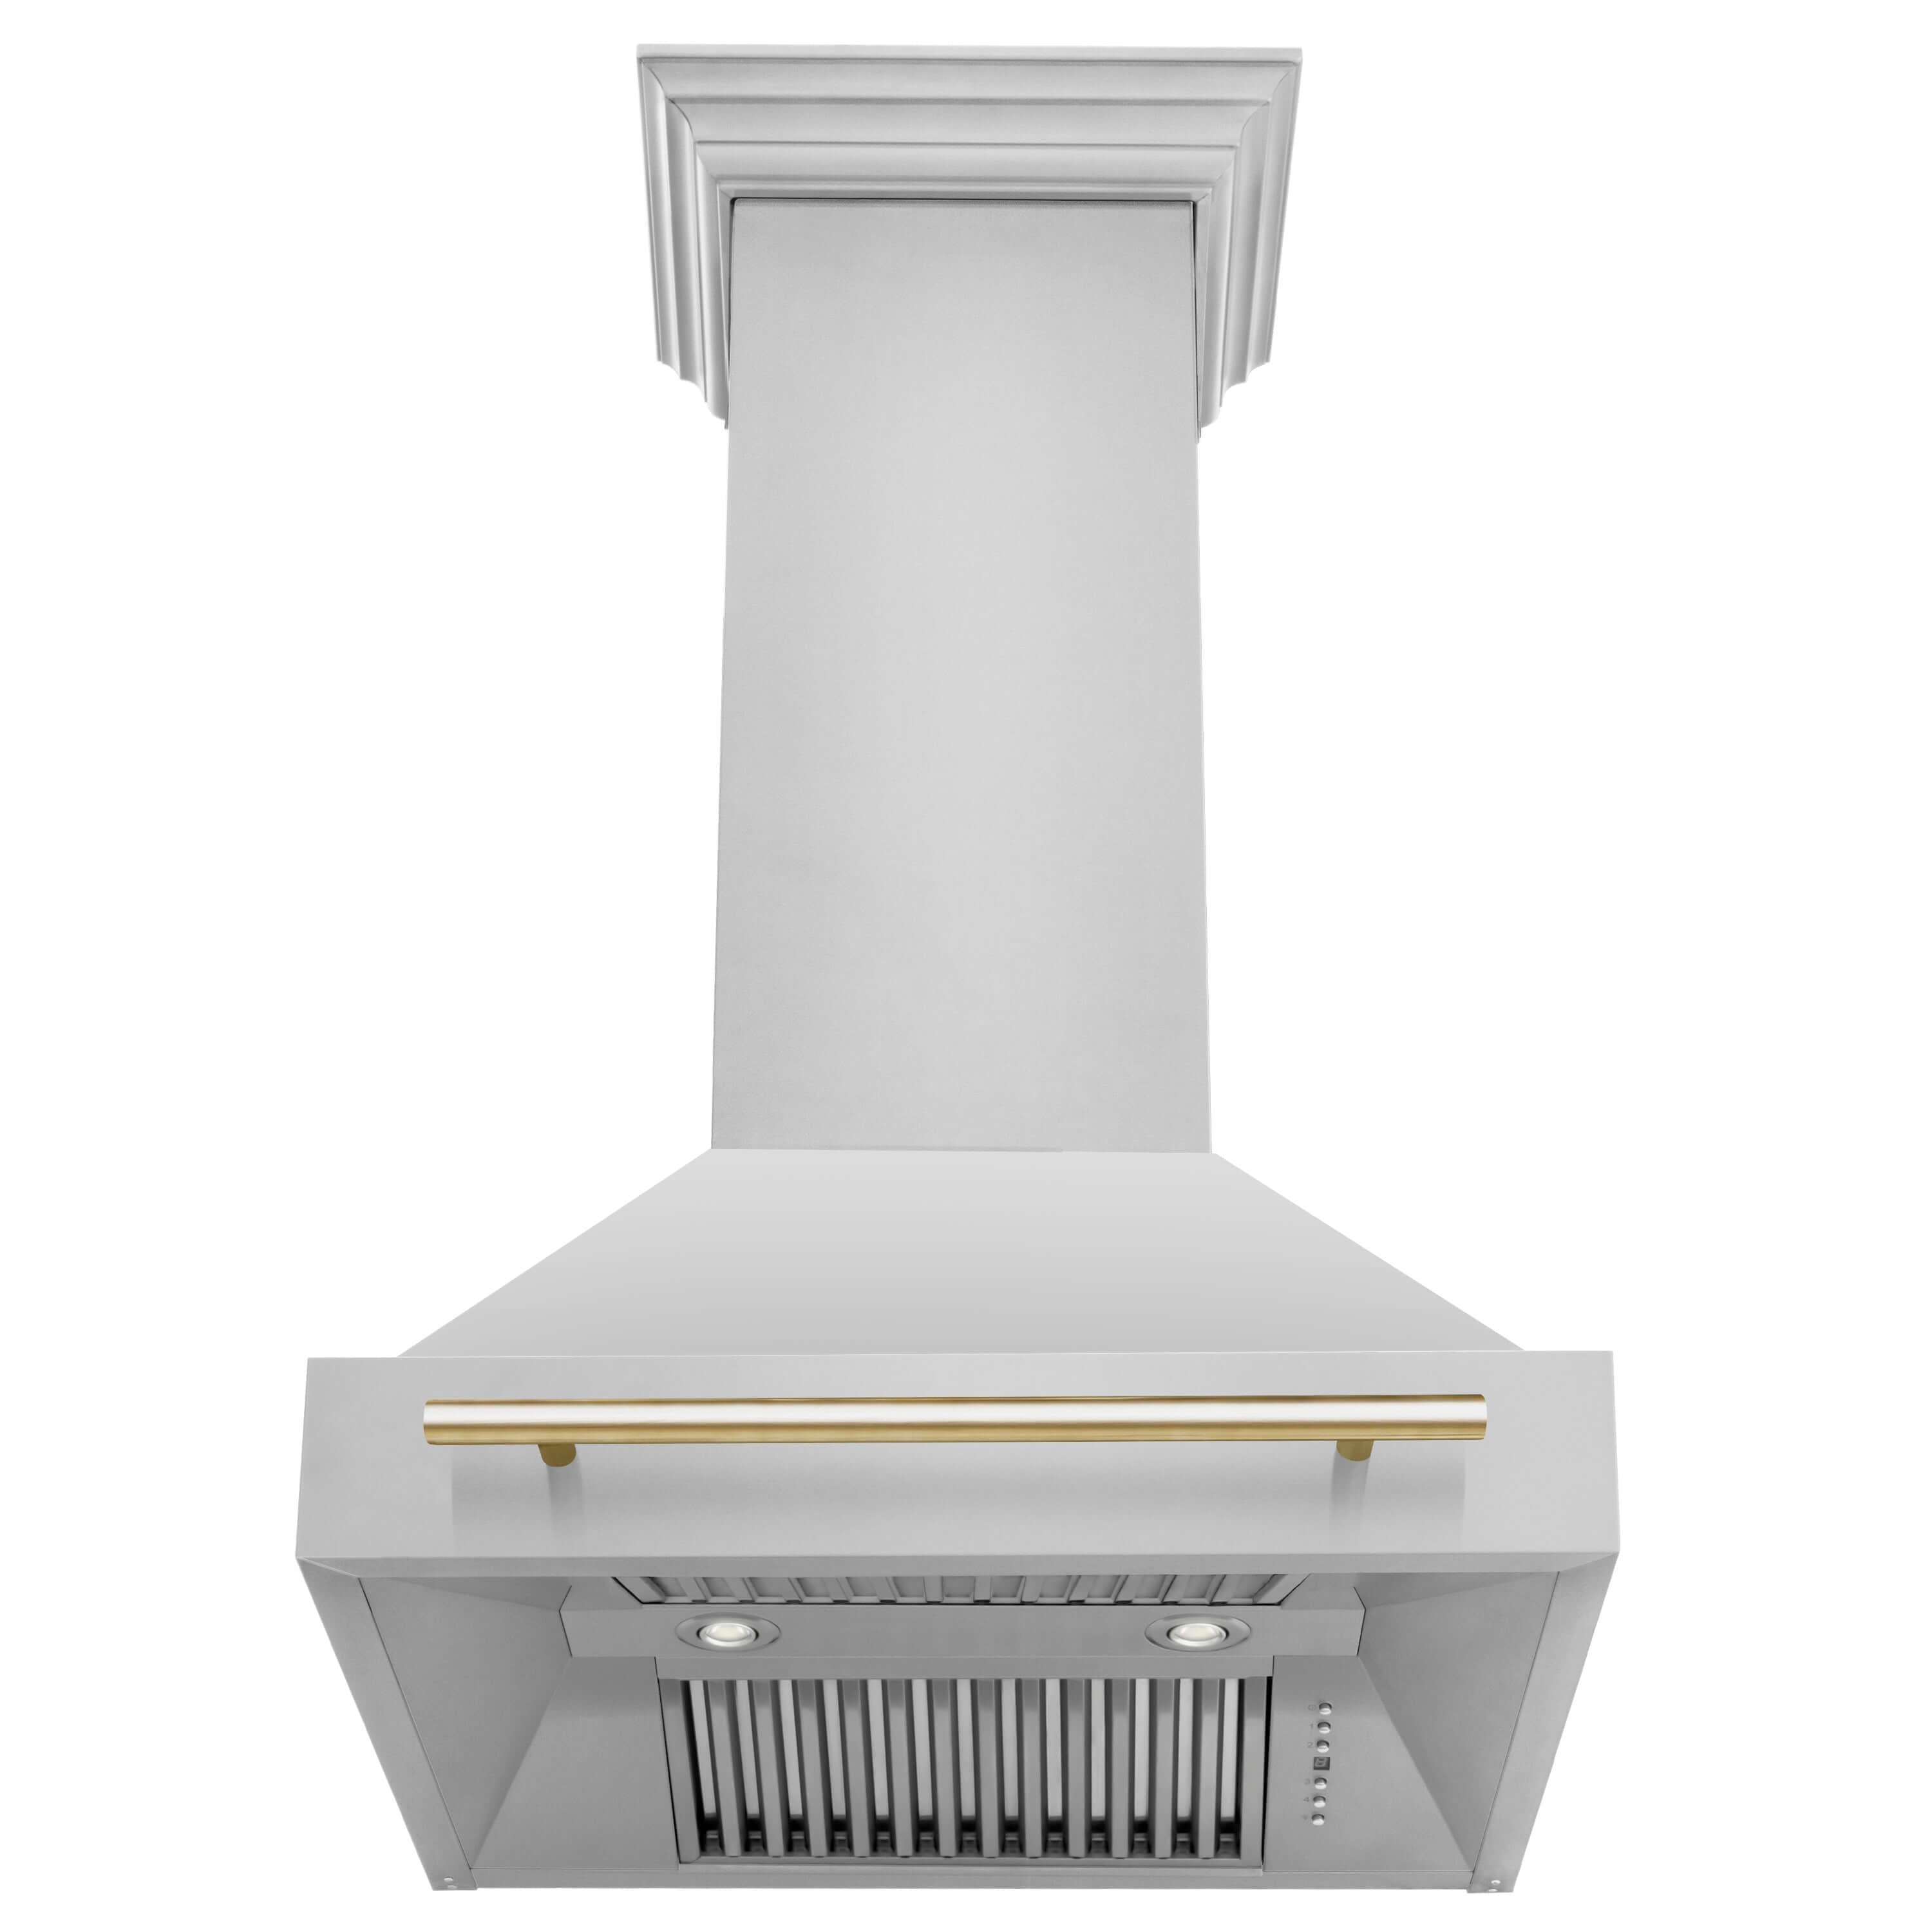 ZLINE 30" Autograph Edition Stainless Steel Range Hood with Stainless Steel Shell and Gold Handle (8654STZ-30-G)